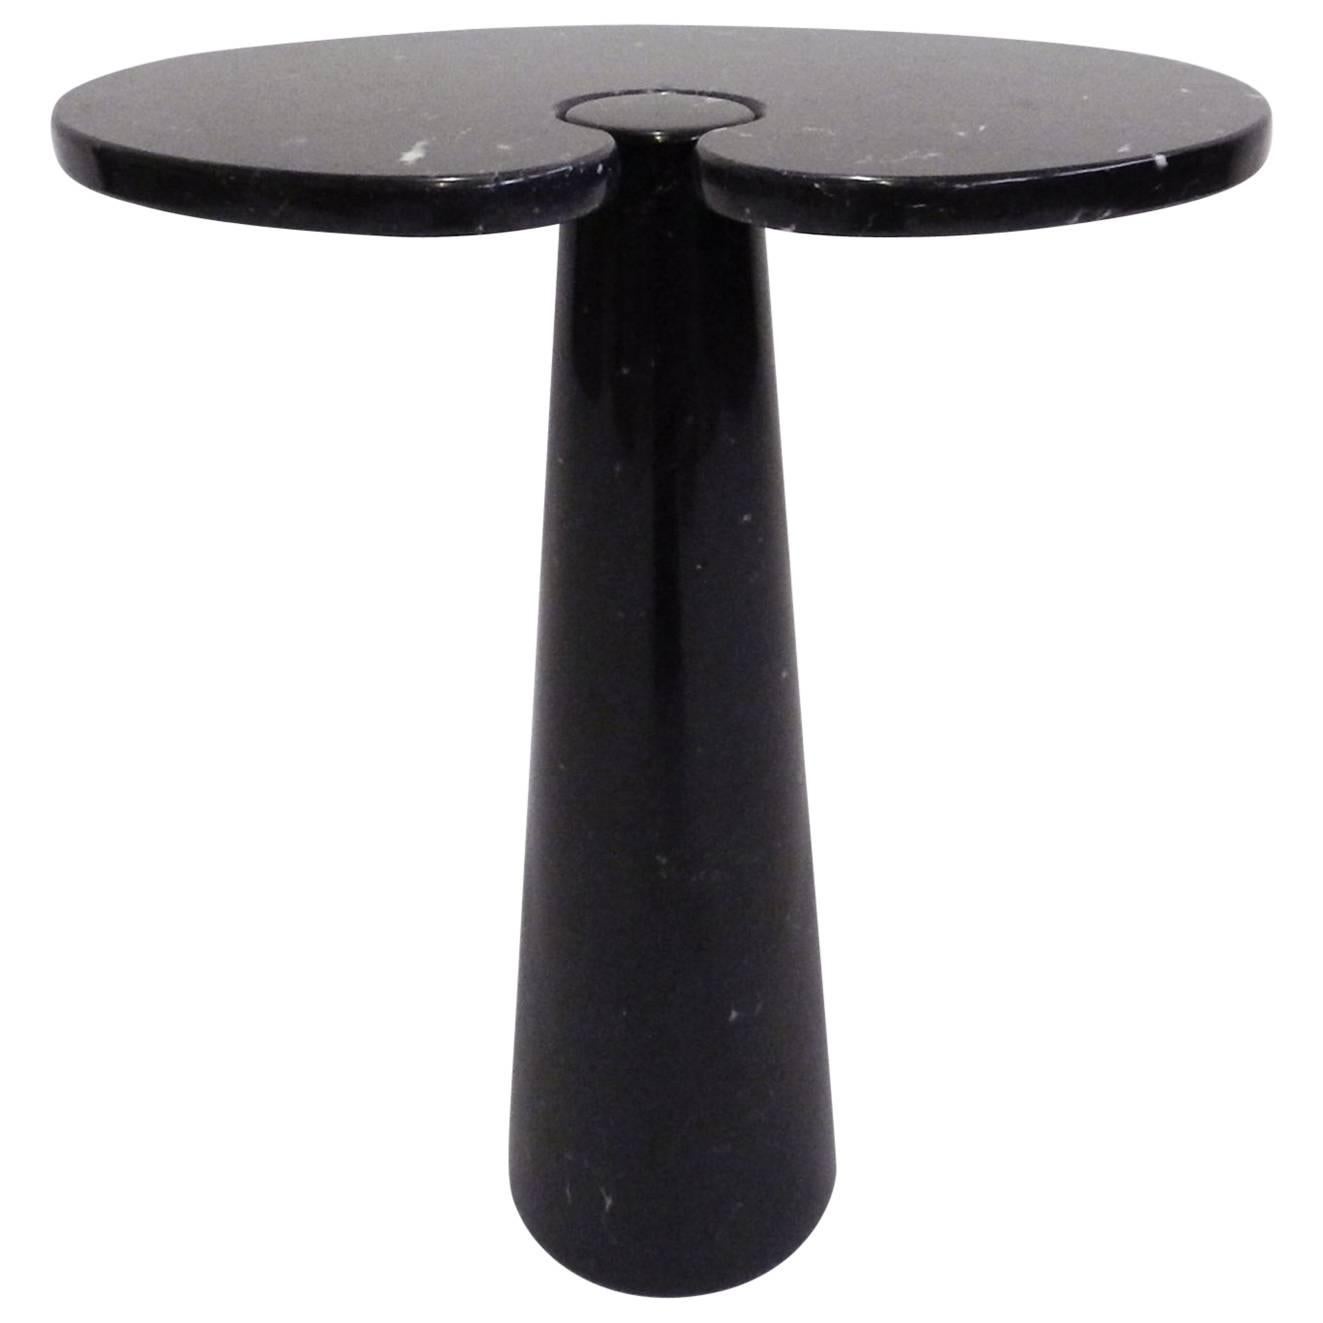 Eros, Iconic High Gueridon Table by Angelo Mangiarotti for Skipper